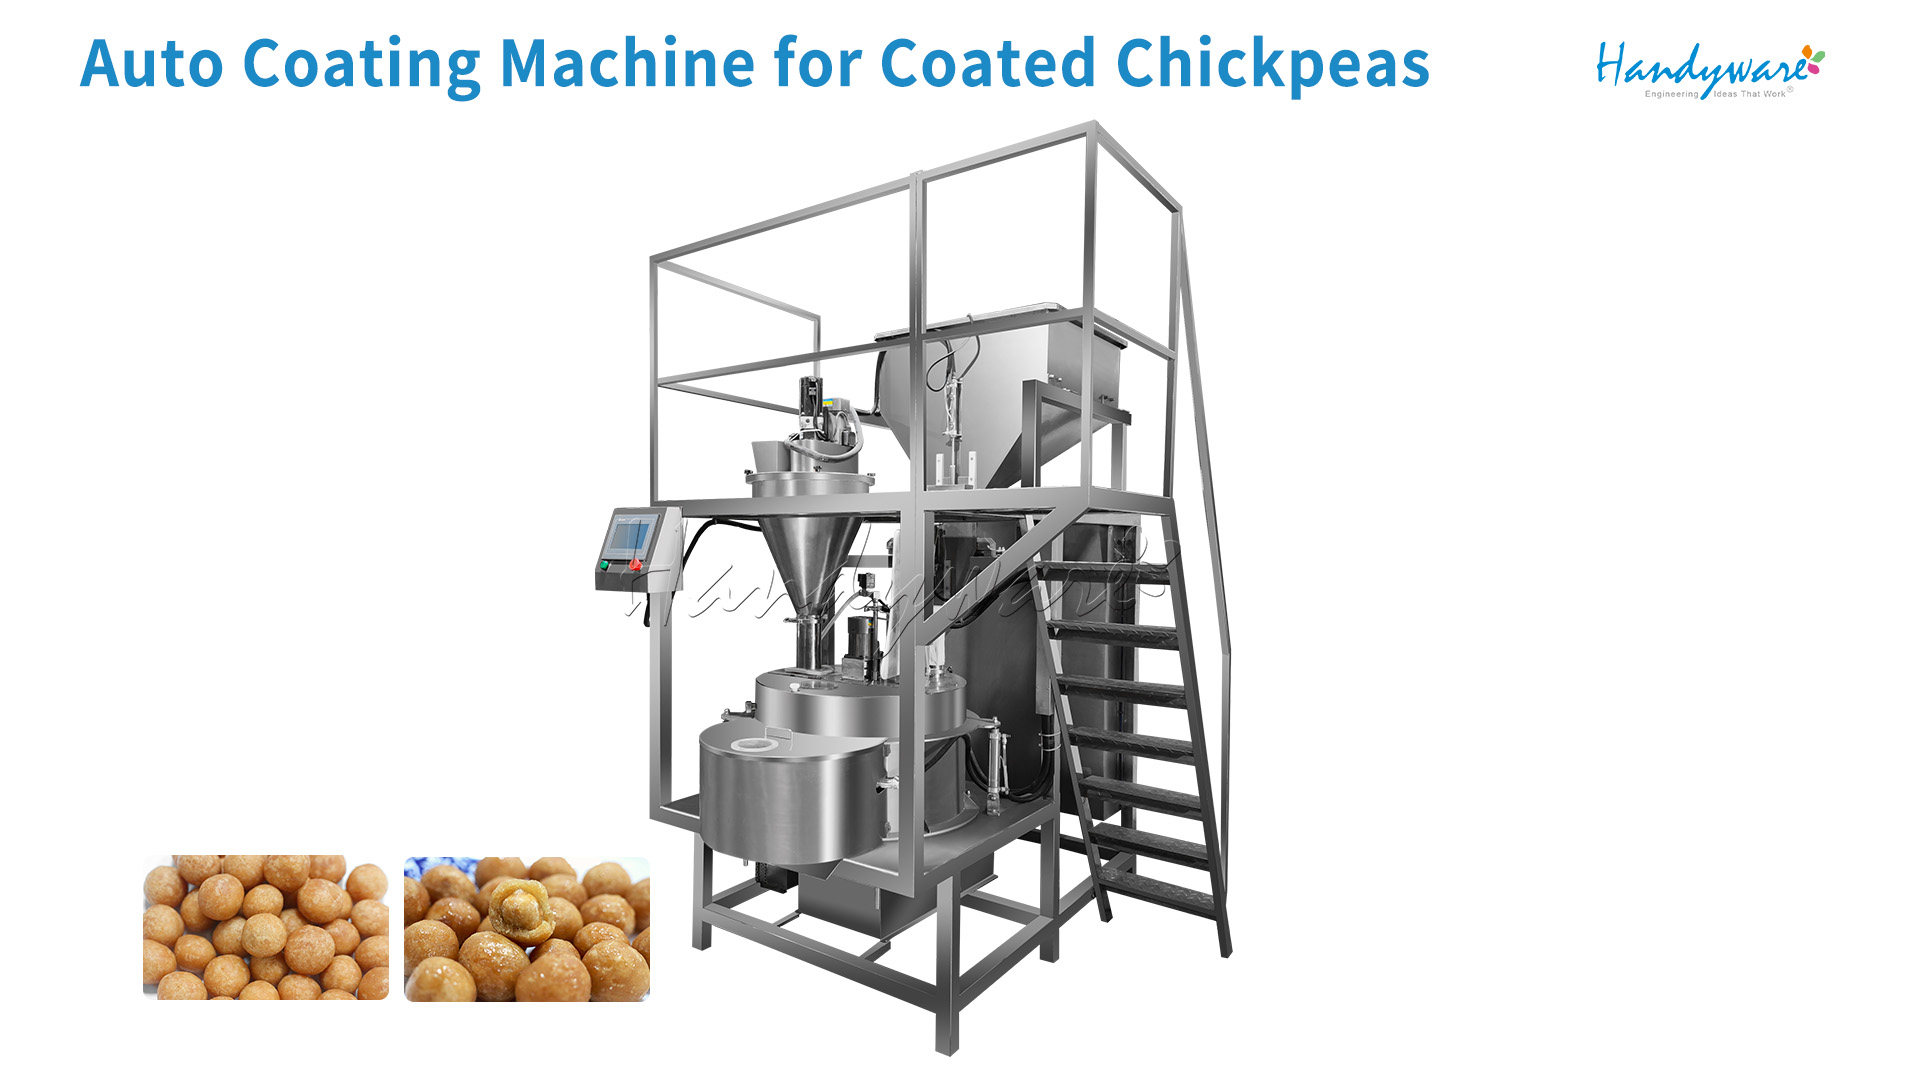 Auto Coating Machine for Coated Chickpeas